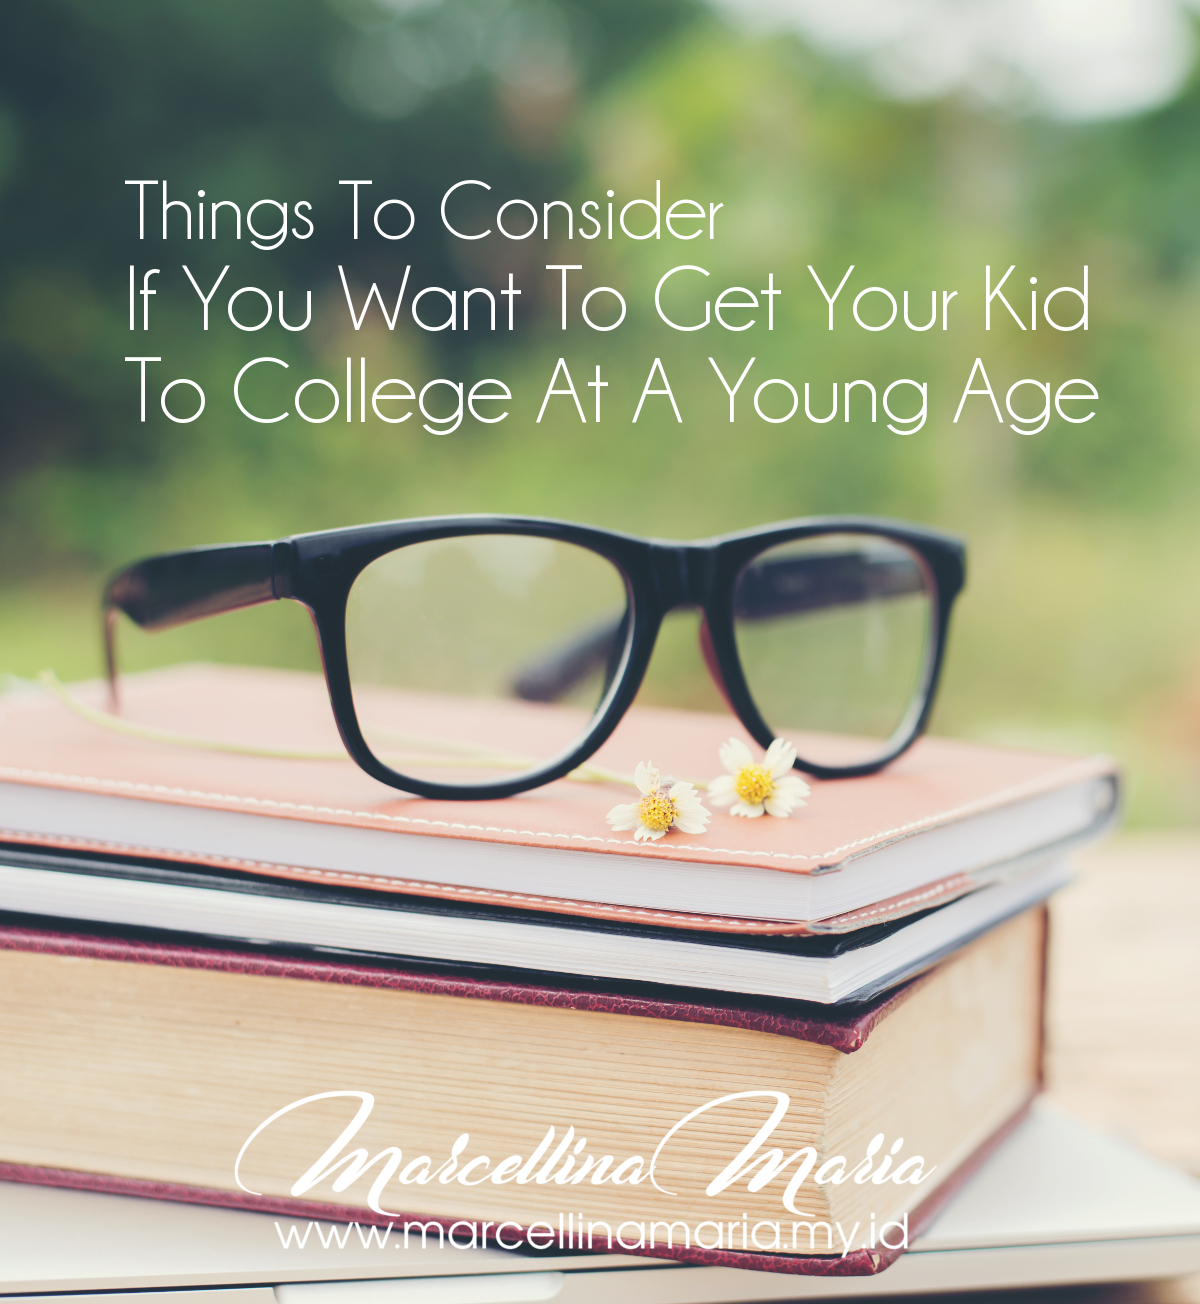 Things to consider if you want to get your kid to college at a young age